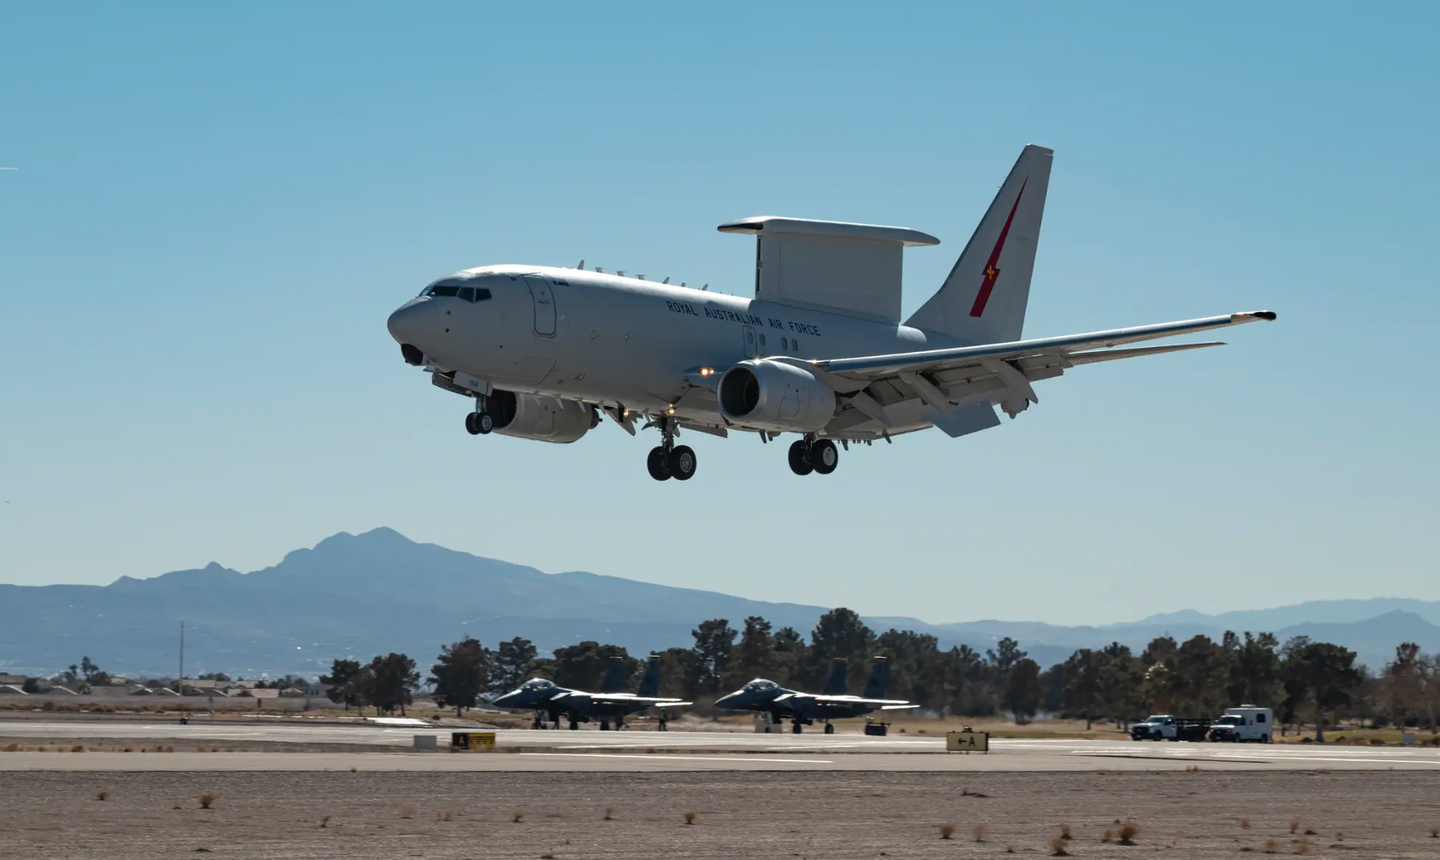 An E-7A Wedgetail from the Royal Australian Air Force lands at Nellis Air Force Base, Nevada, on January 20, 2022, for Red Flag 22-1.&nbsp;<em>U.S. Air Force/William R. Lewis</em>